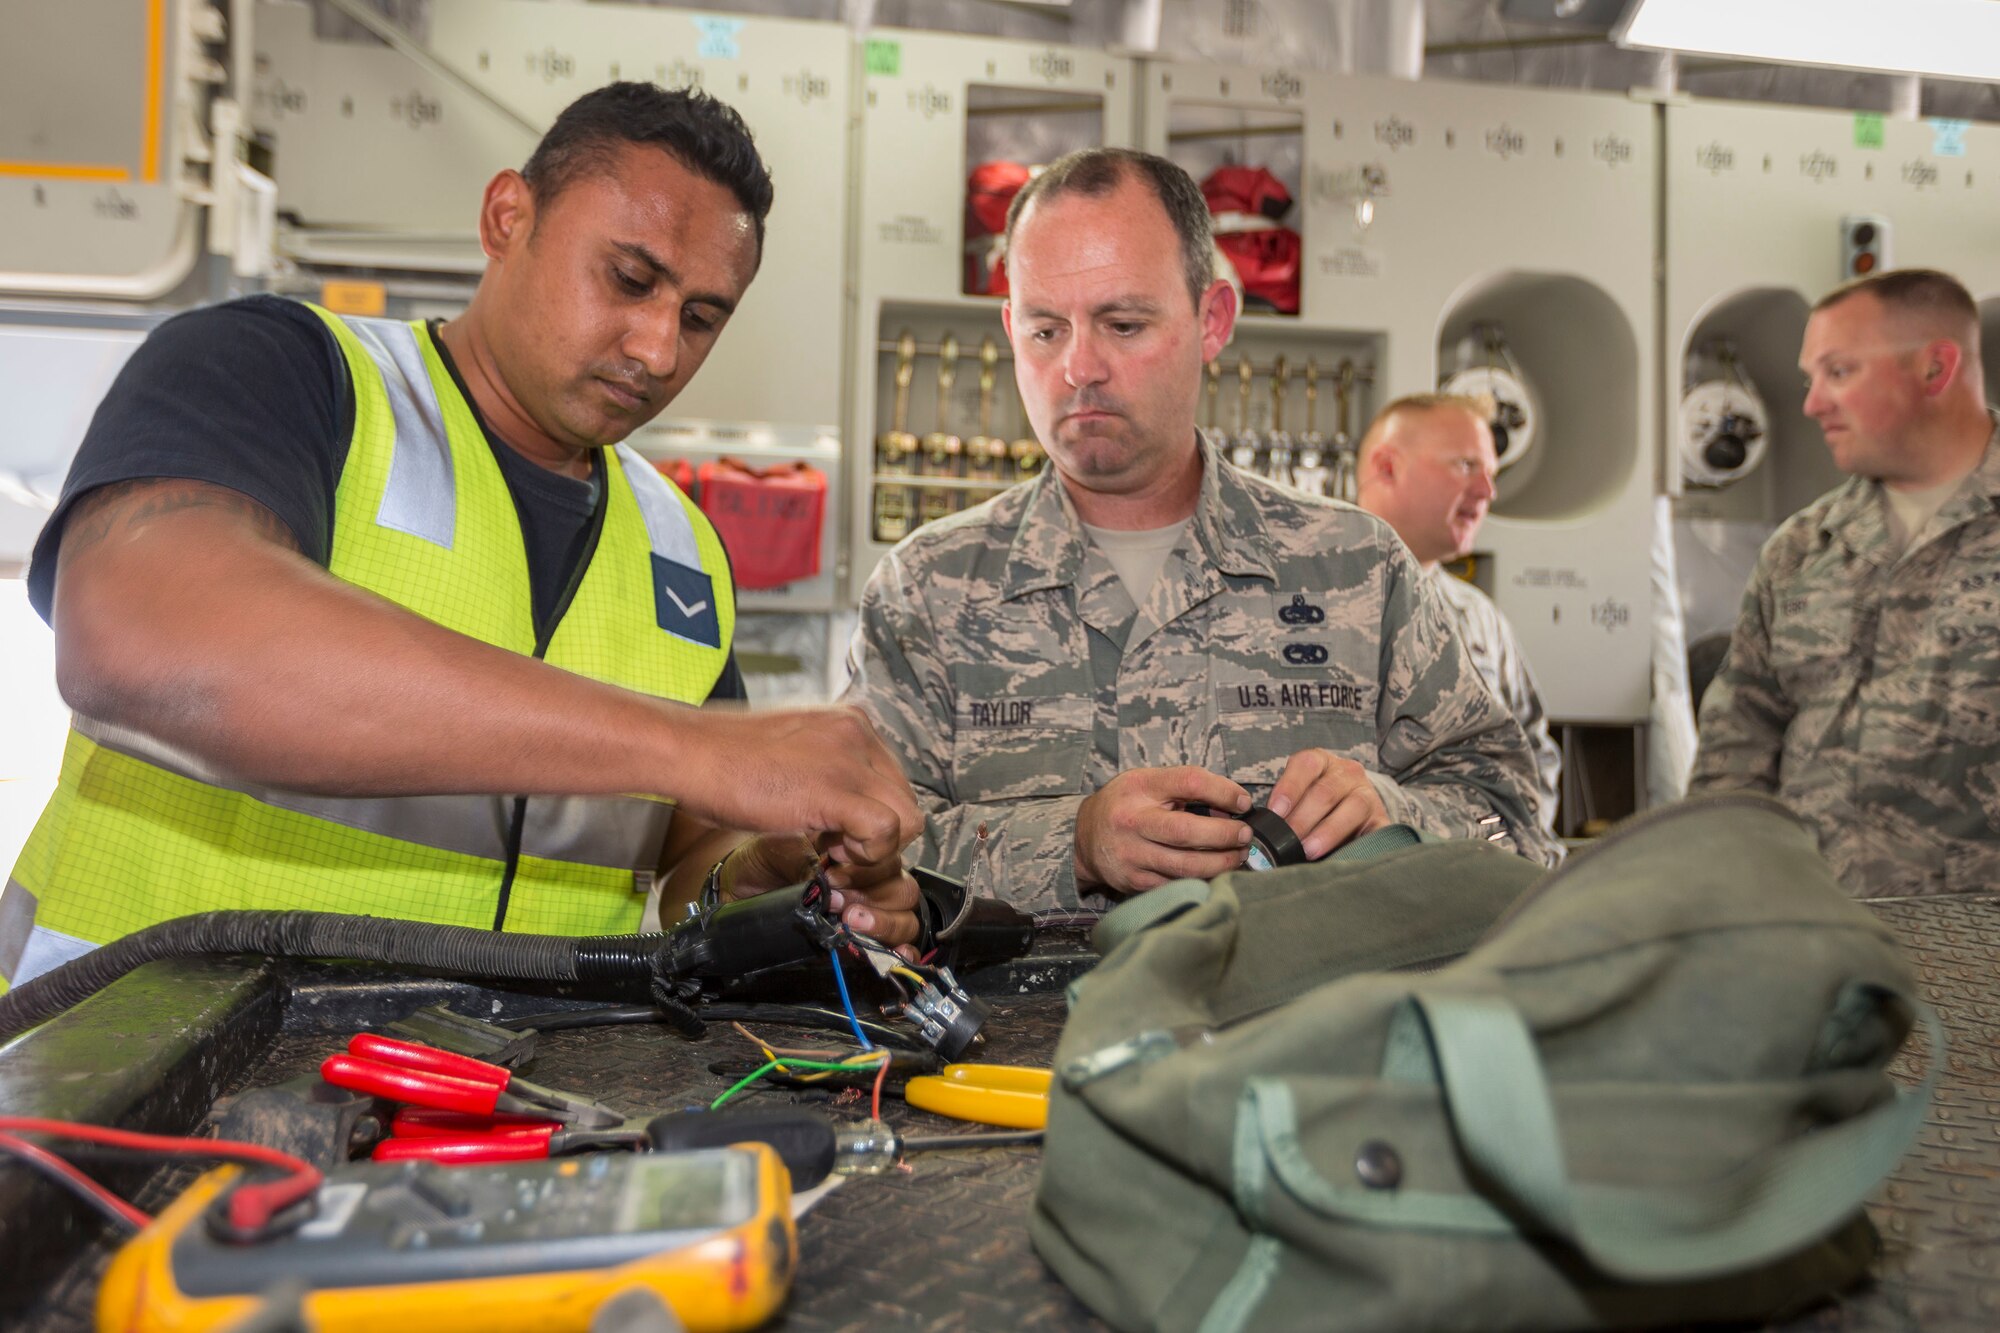 Leading Aircraftman Nitin Naidu (left), an Avionics Technician assigned to No 36 Squadron, strips electrical wire for a plug with the help of a U.S. Airman during Pitch Black 16, in Darwin, Australia, Aug. 2, 2016. Pitch Black is a biennial multinational air warfare exercise hosted by the Royal Australian Air Force that focuses on offensive counter air and defensive counter air combat in a simulated war environment. (Australian Defence Force photo by Cpl. David Gibbs)